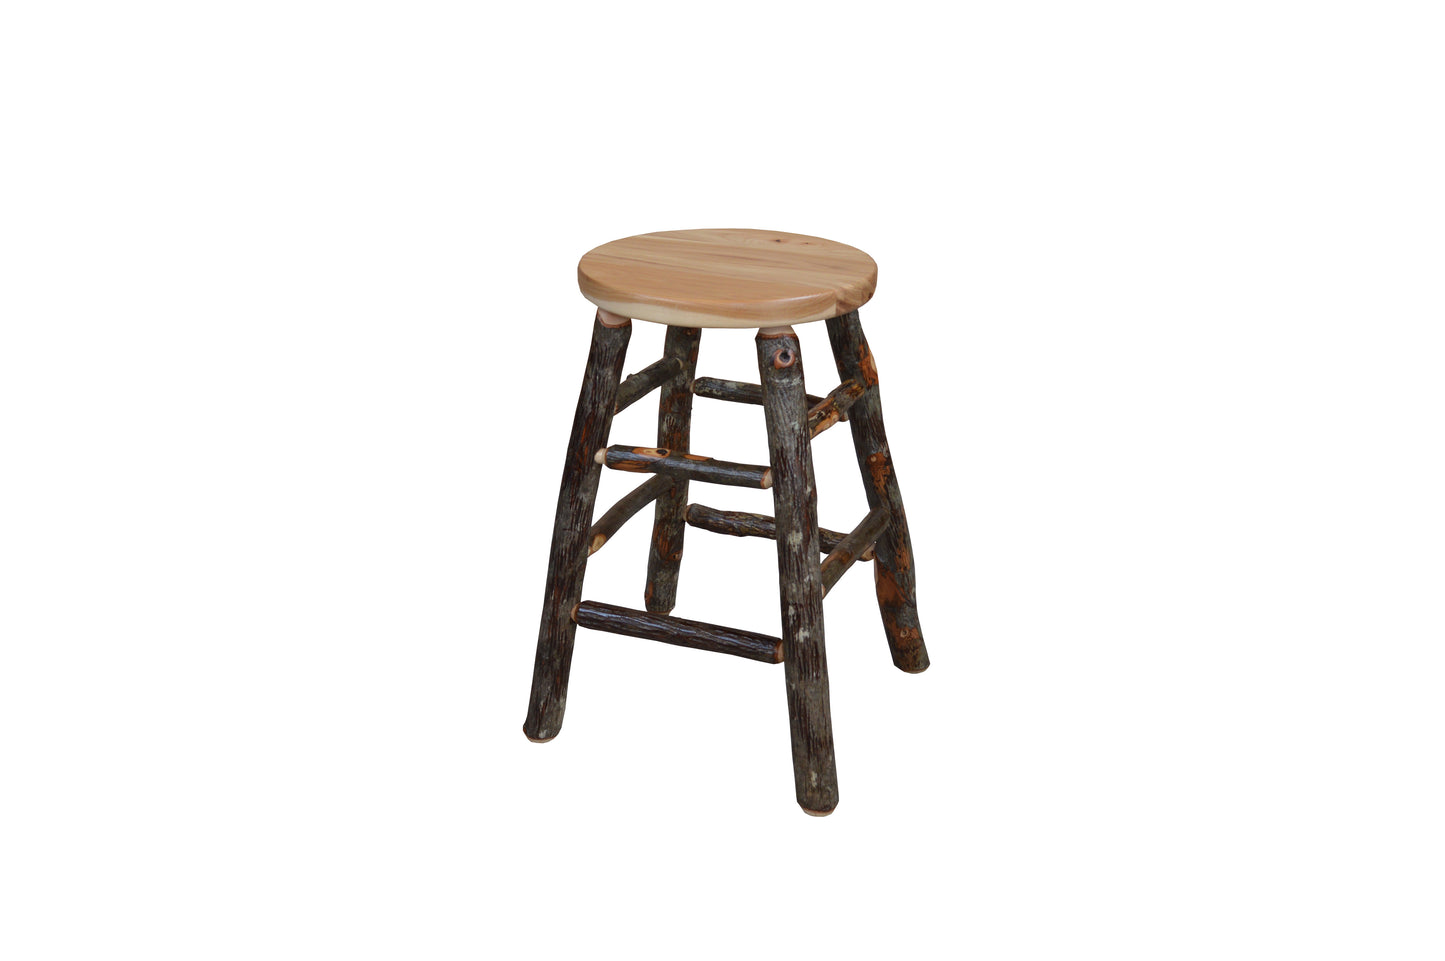 A&L Furniture Co. Hickory Counter Stool - LEAD TIME TO SHIP 10 BUSINESS DAYS